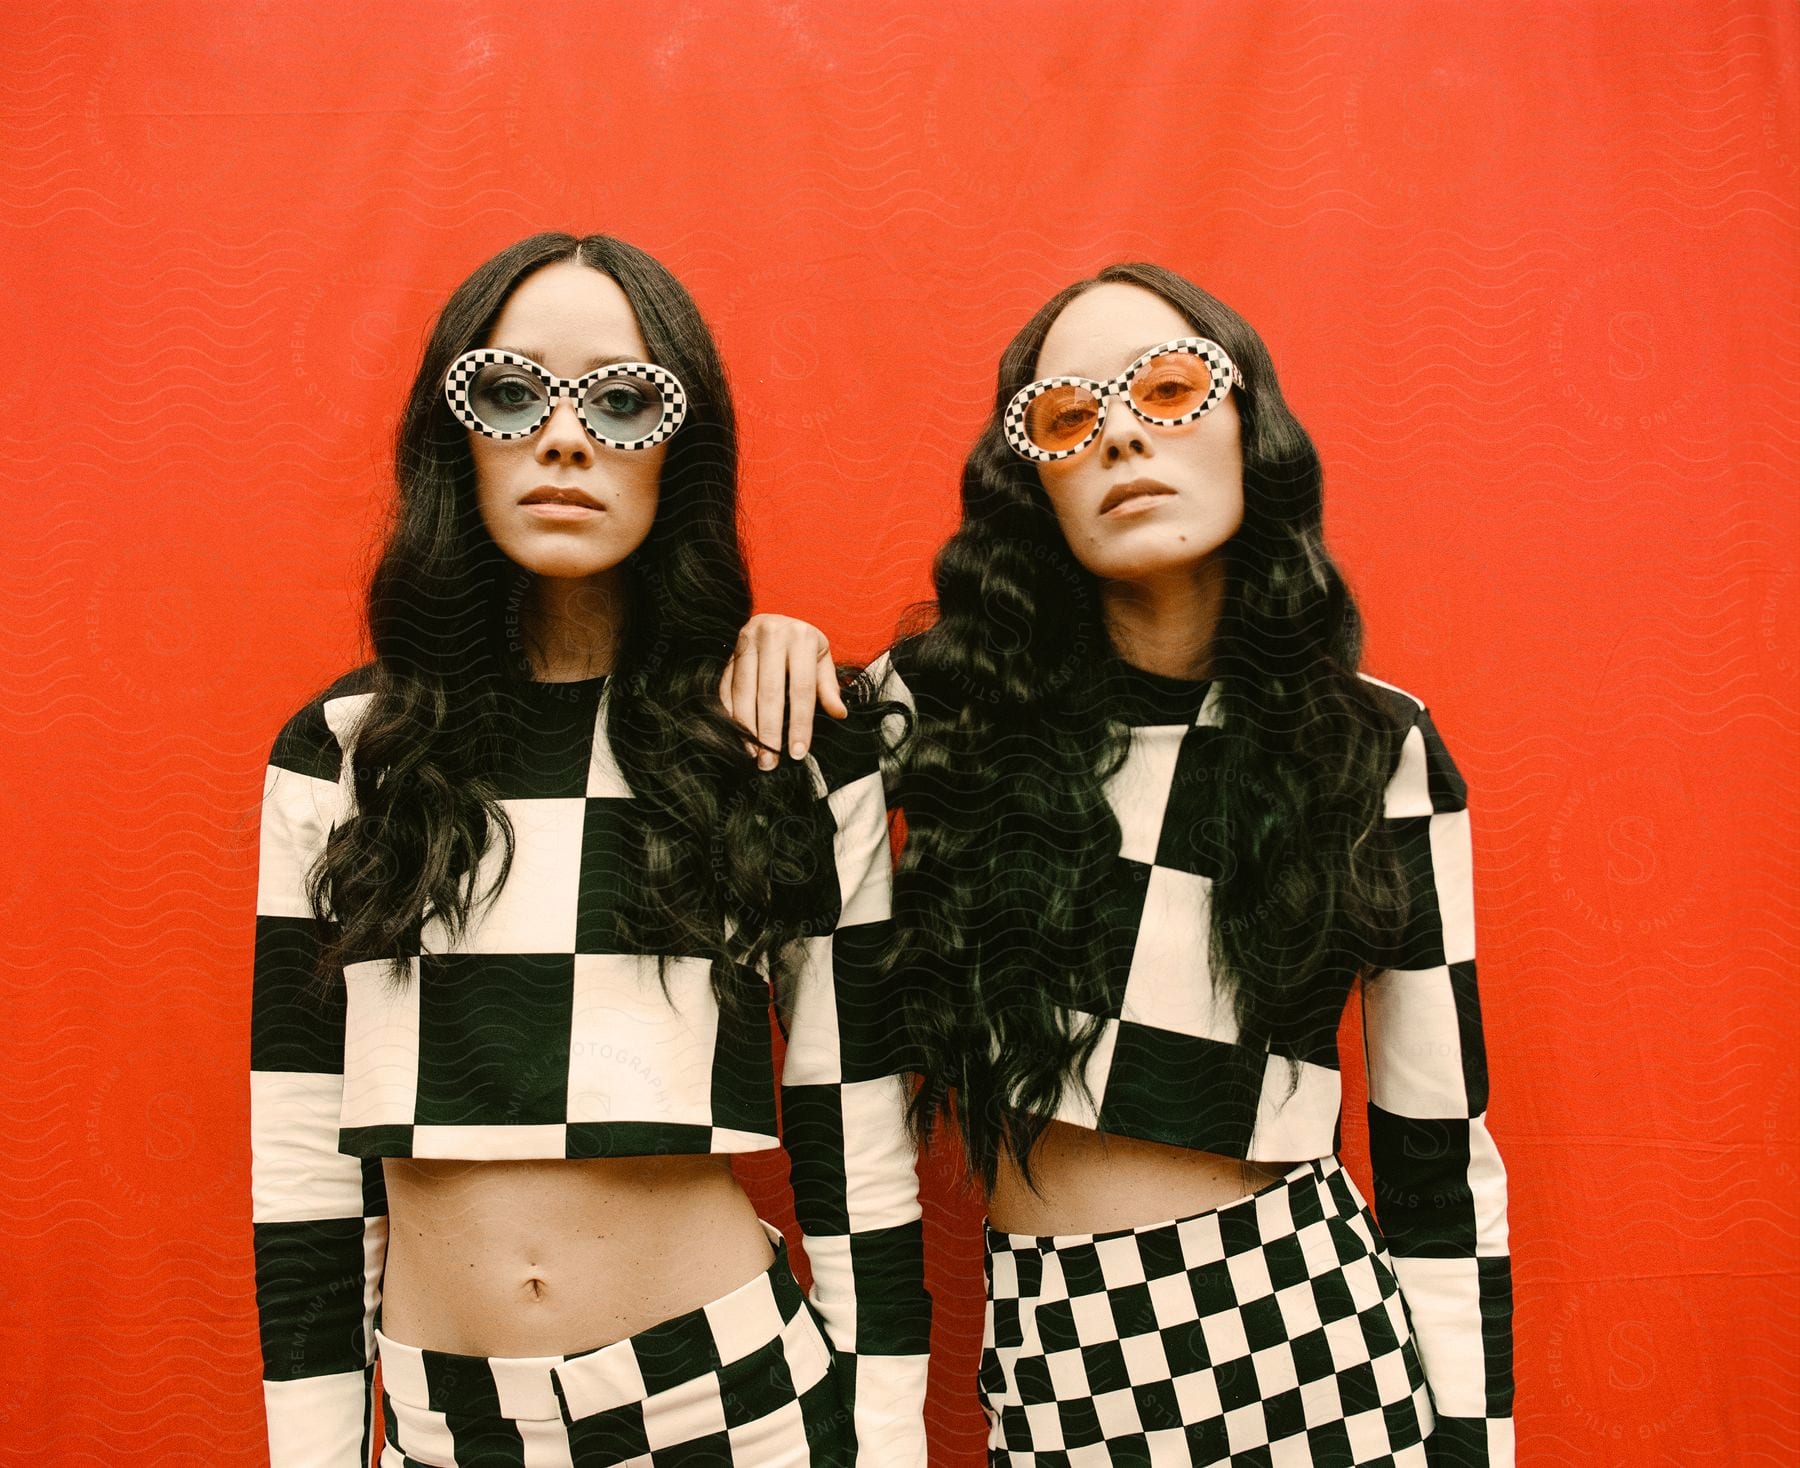 Portrait of two women posing in identical outfits against a red background.